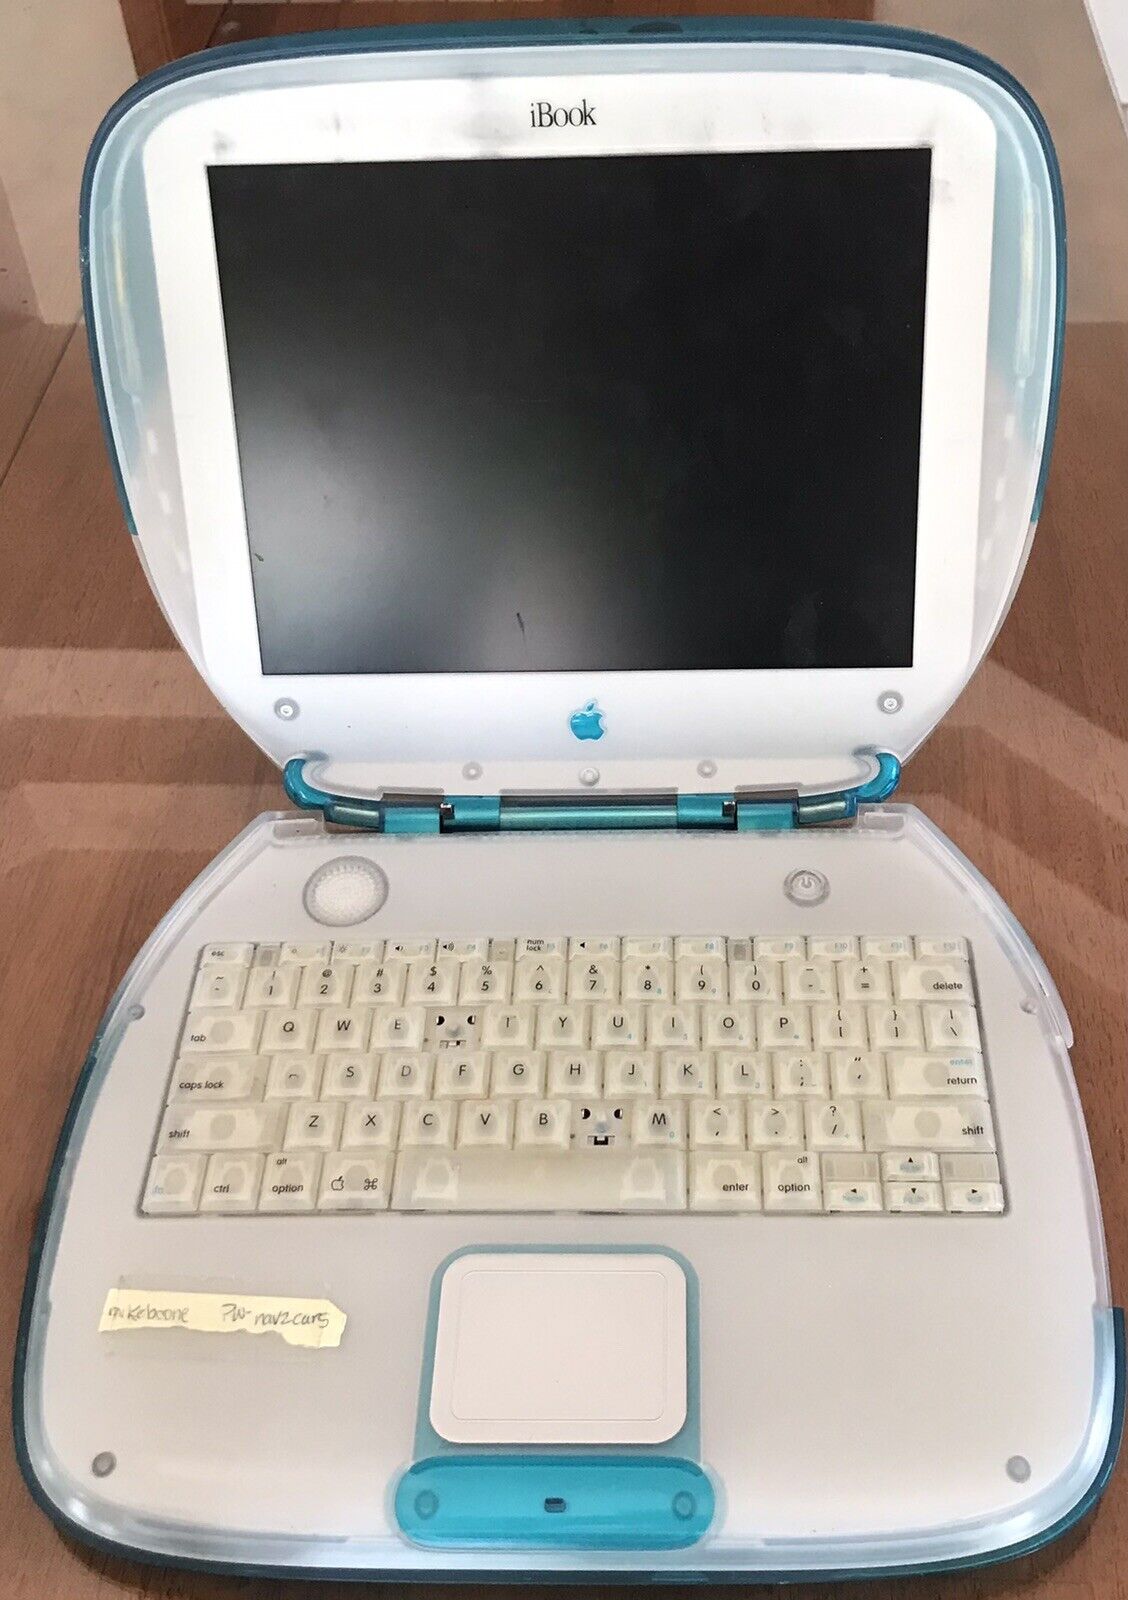 Vintage Apple Blueberry Clamshell iBook G3 M2453 Untested No Power Cord